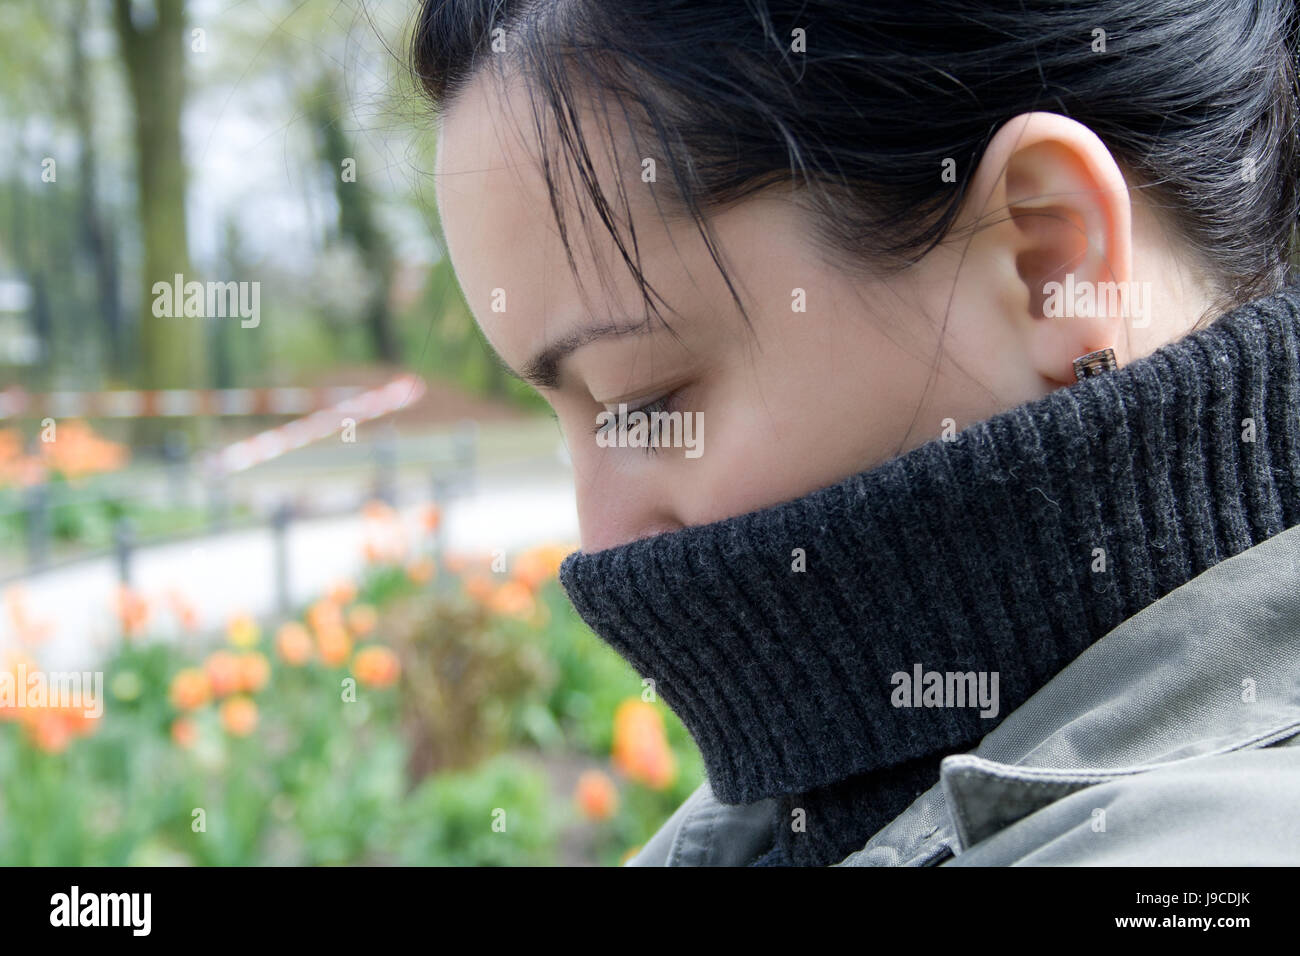 woman, women, female, person, sadness, depression, grief, problems, woman, Stock Photo